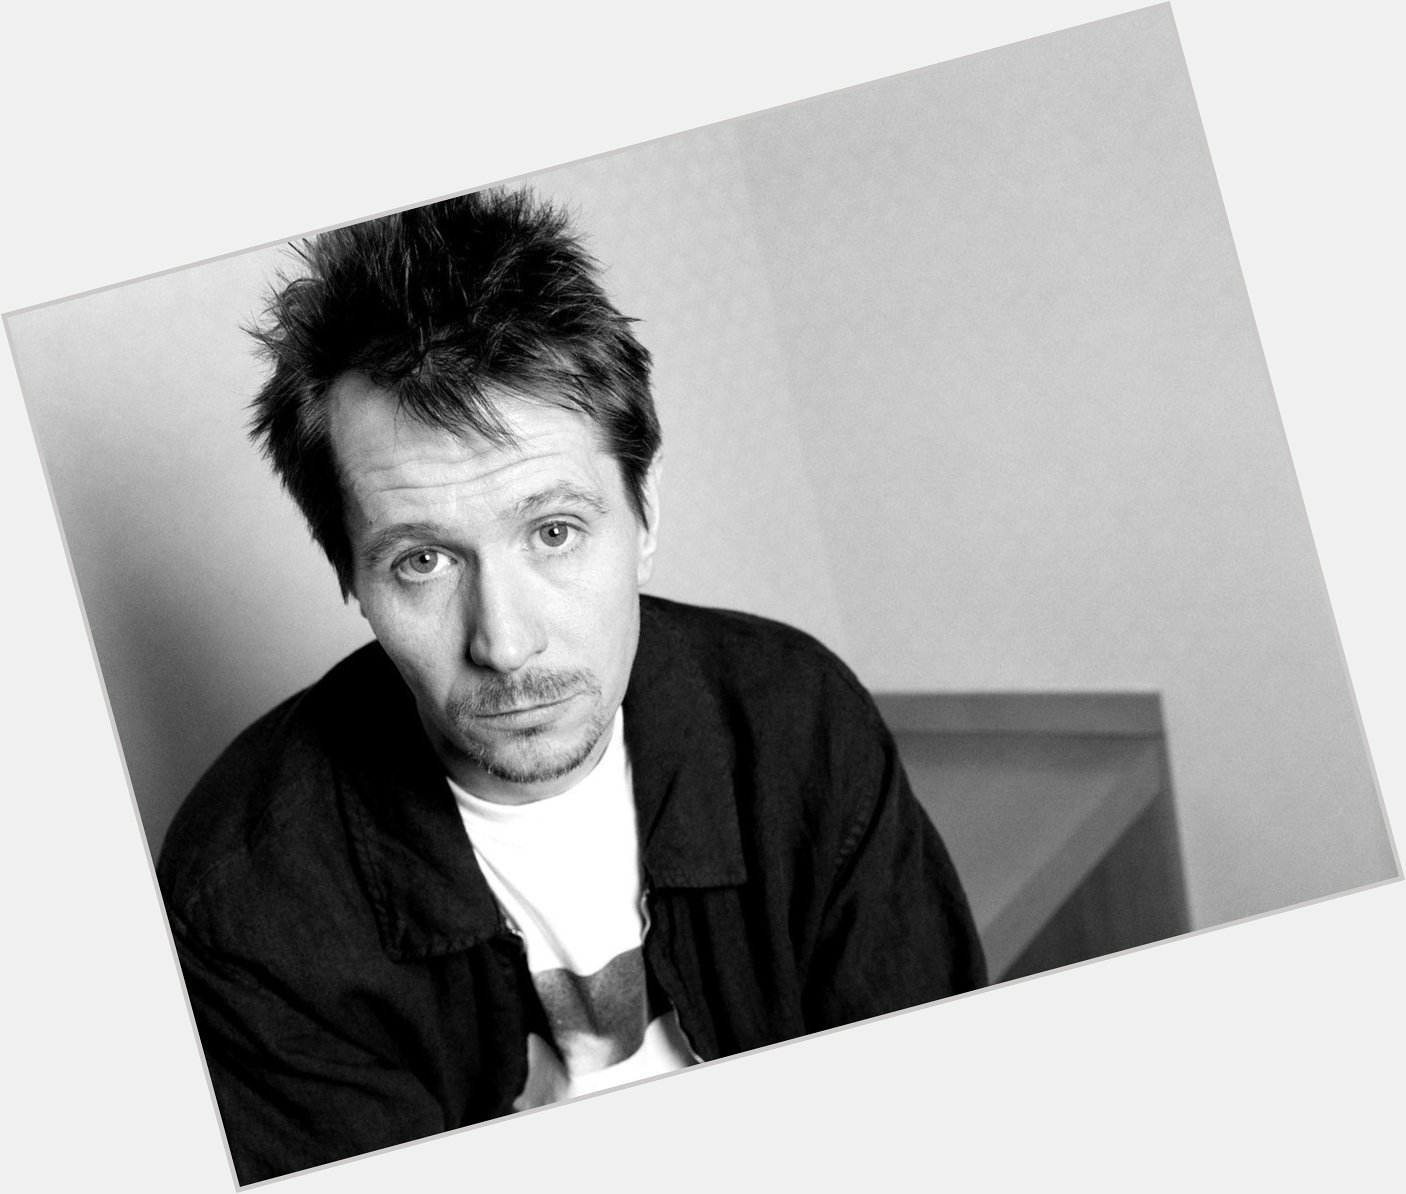 Happy Birthday, Gary Oldman!!
I hope that this will be a wonderful year for Gary. 